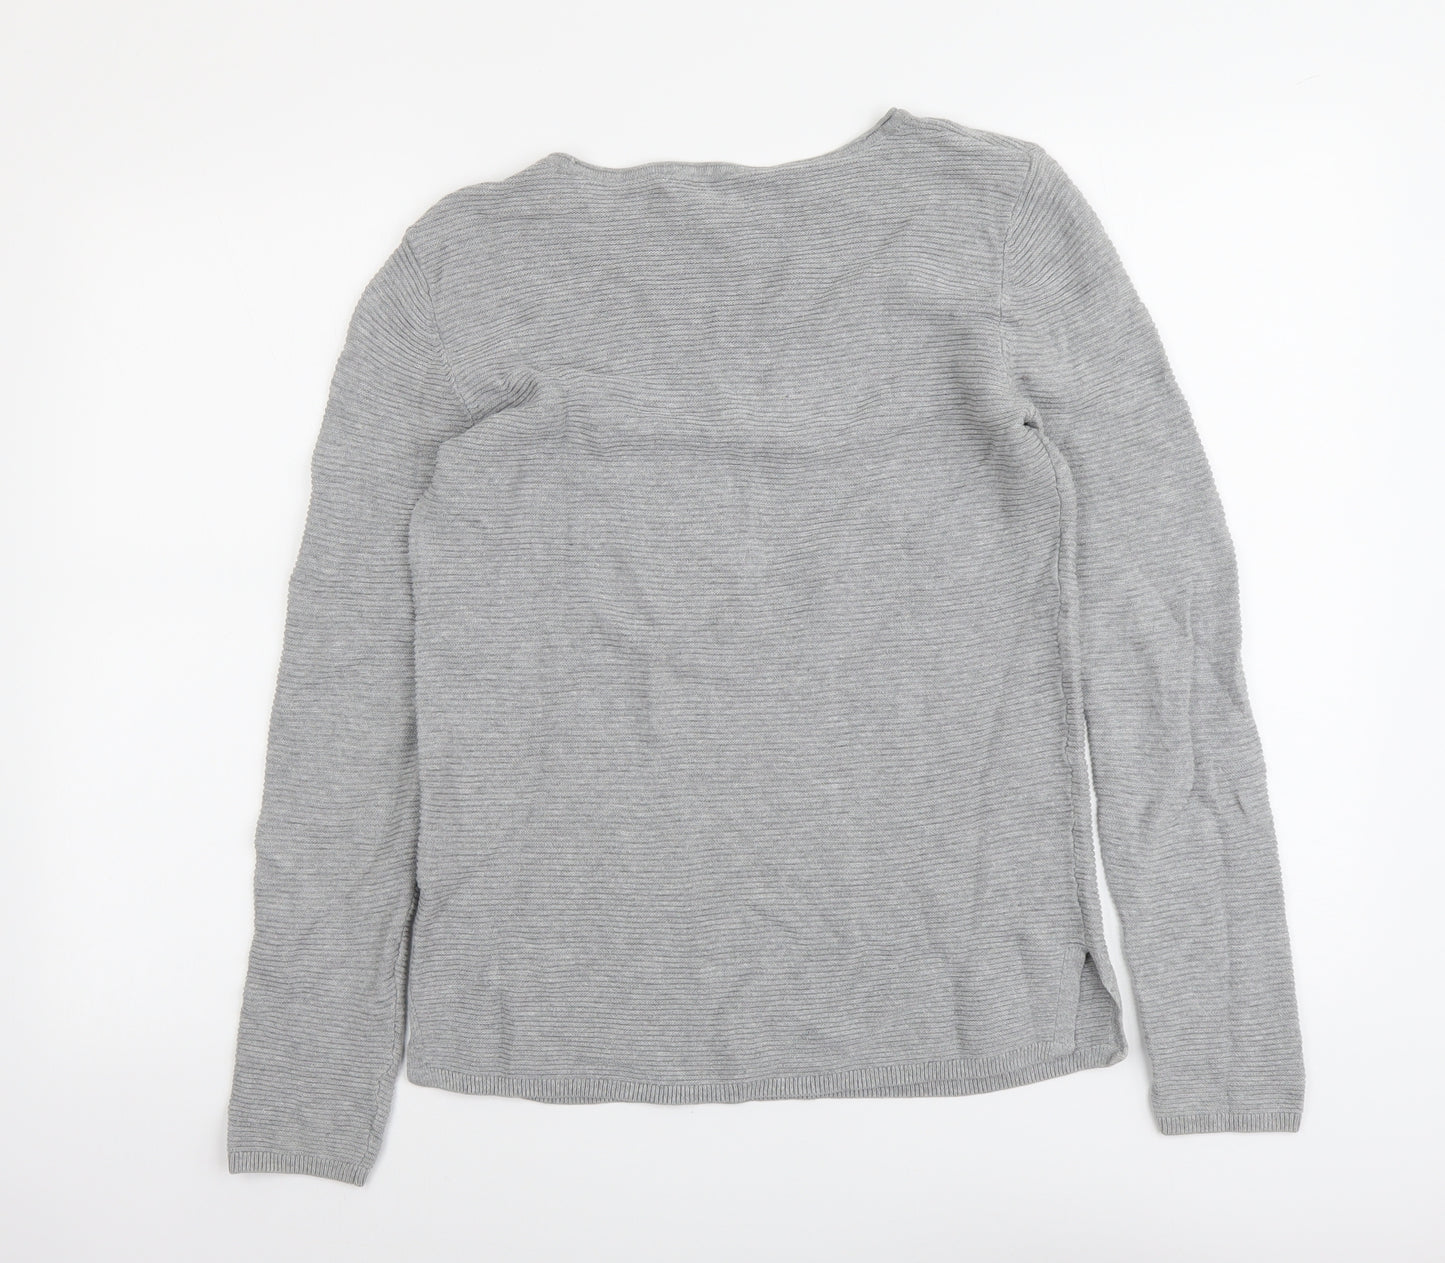 TOM TAILOR Womens Grey Boat Neck Cotton Pullover Jumper Size S - Ribbed